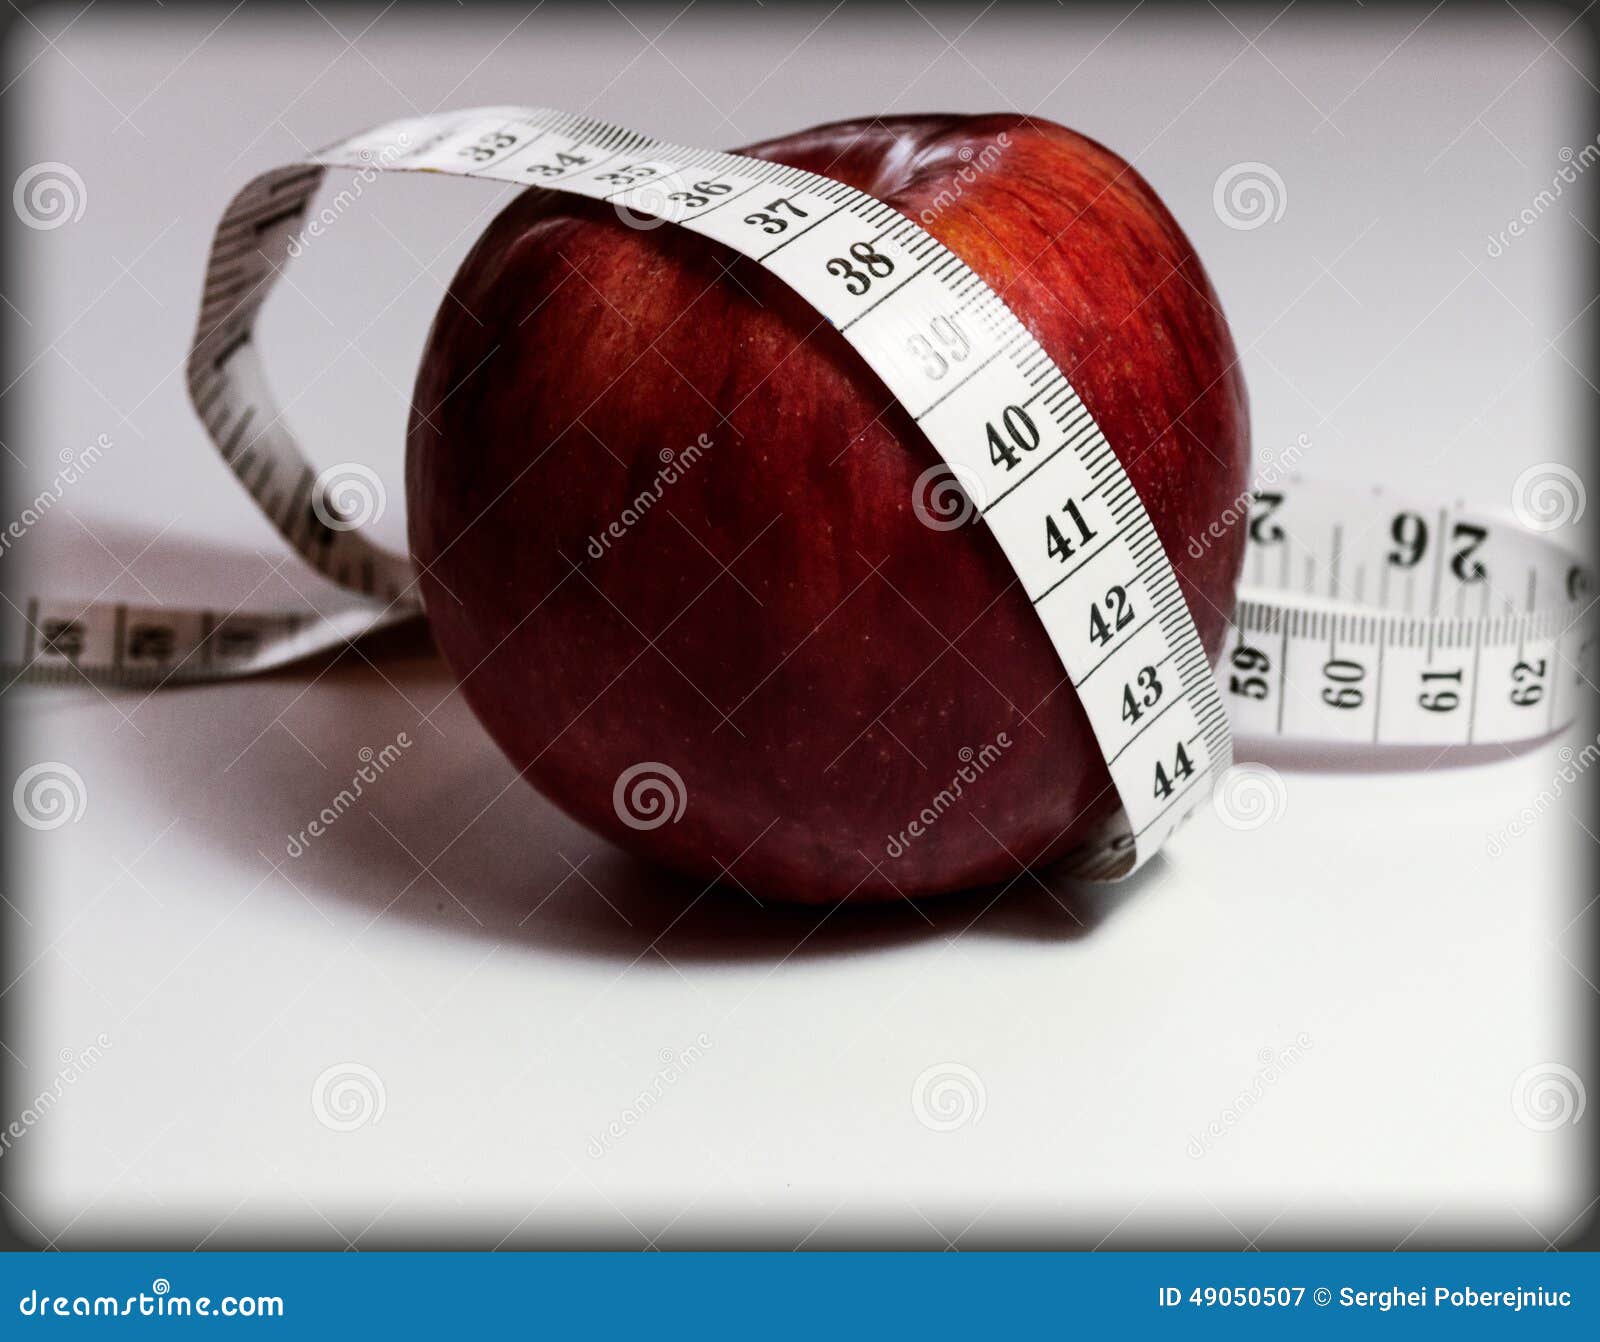 Healthy Lifestyle, We Watch The Diet, We Consider Calories Stock Photo ...